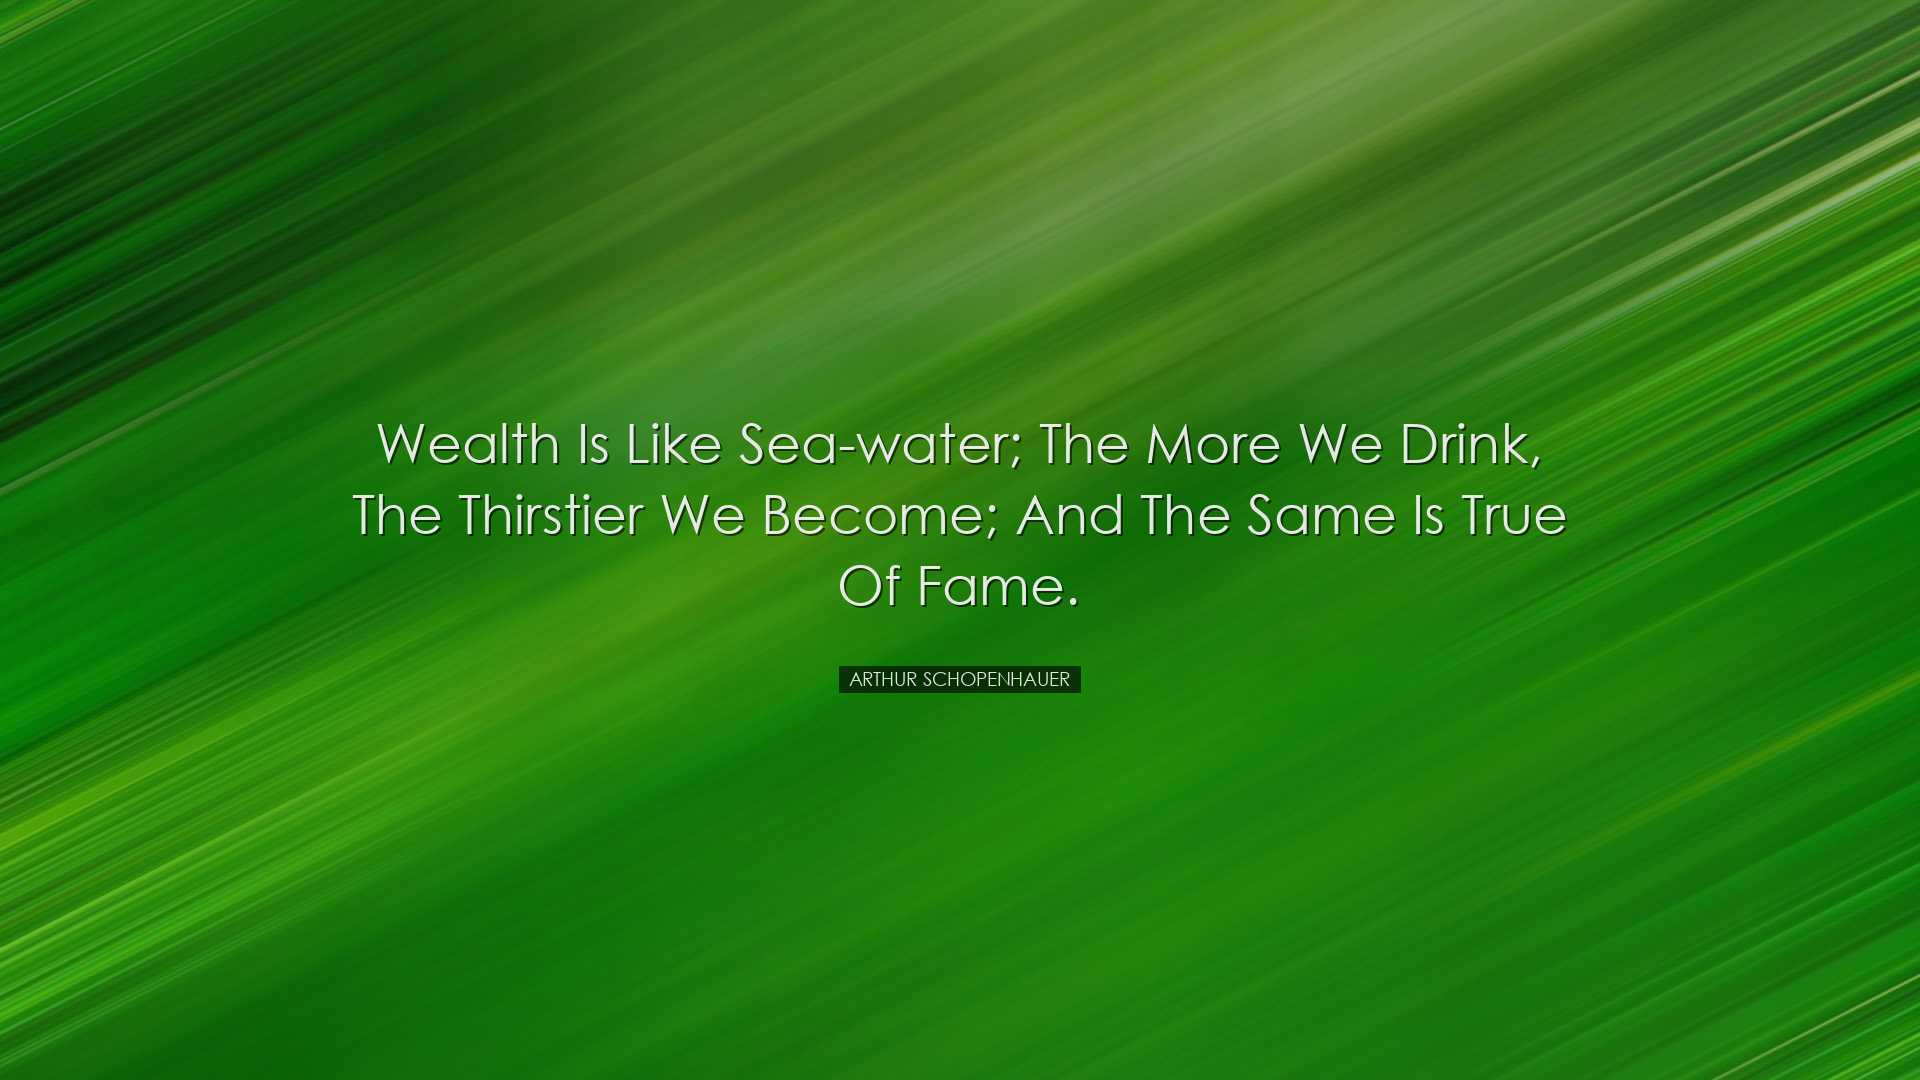 Wealth is like sea-water; the more we drink, the thirstier we beco